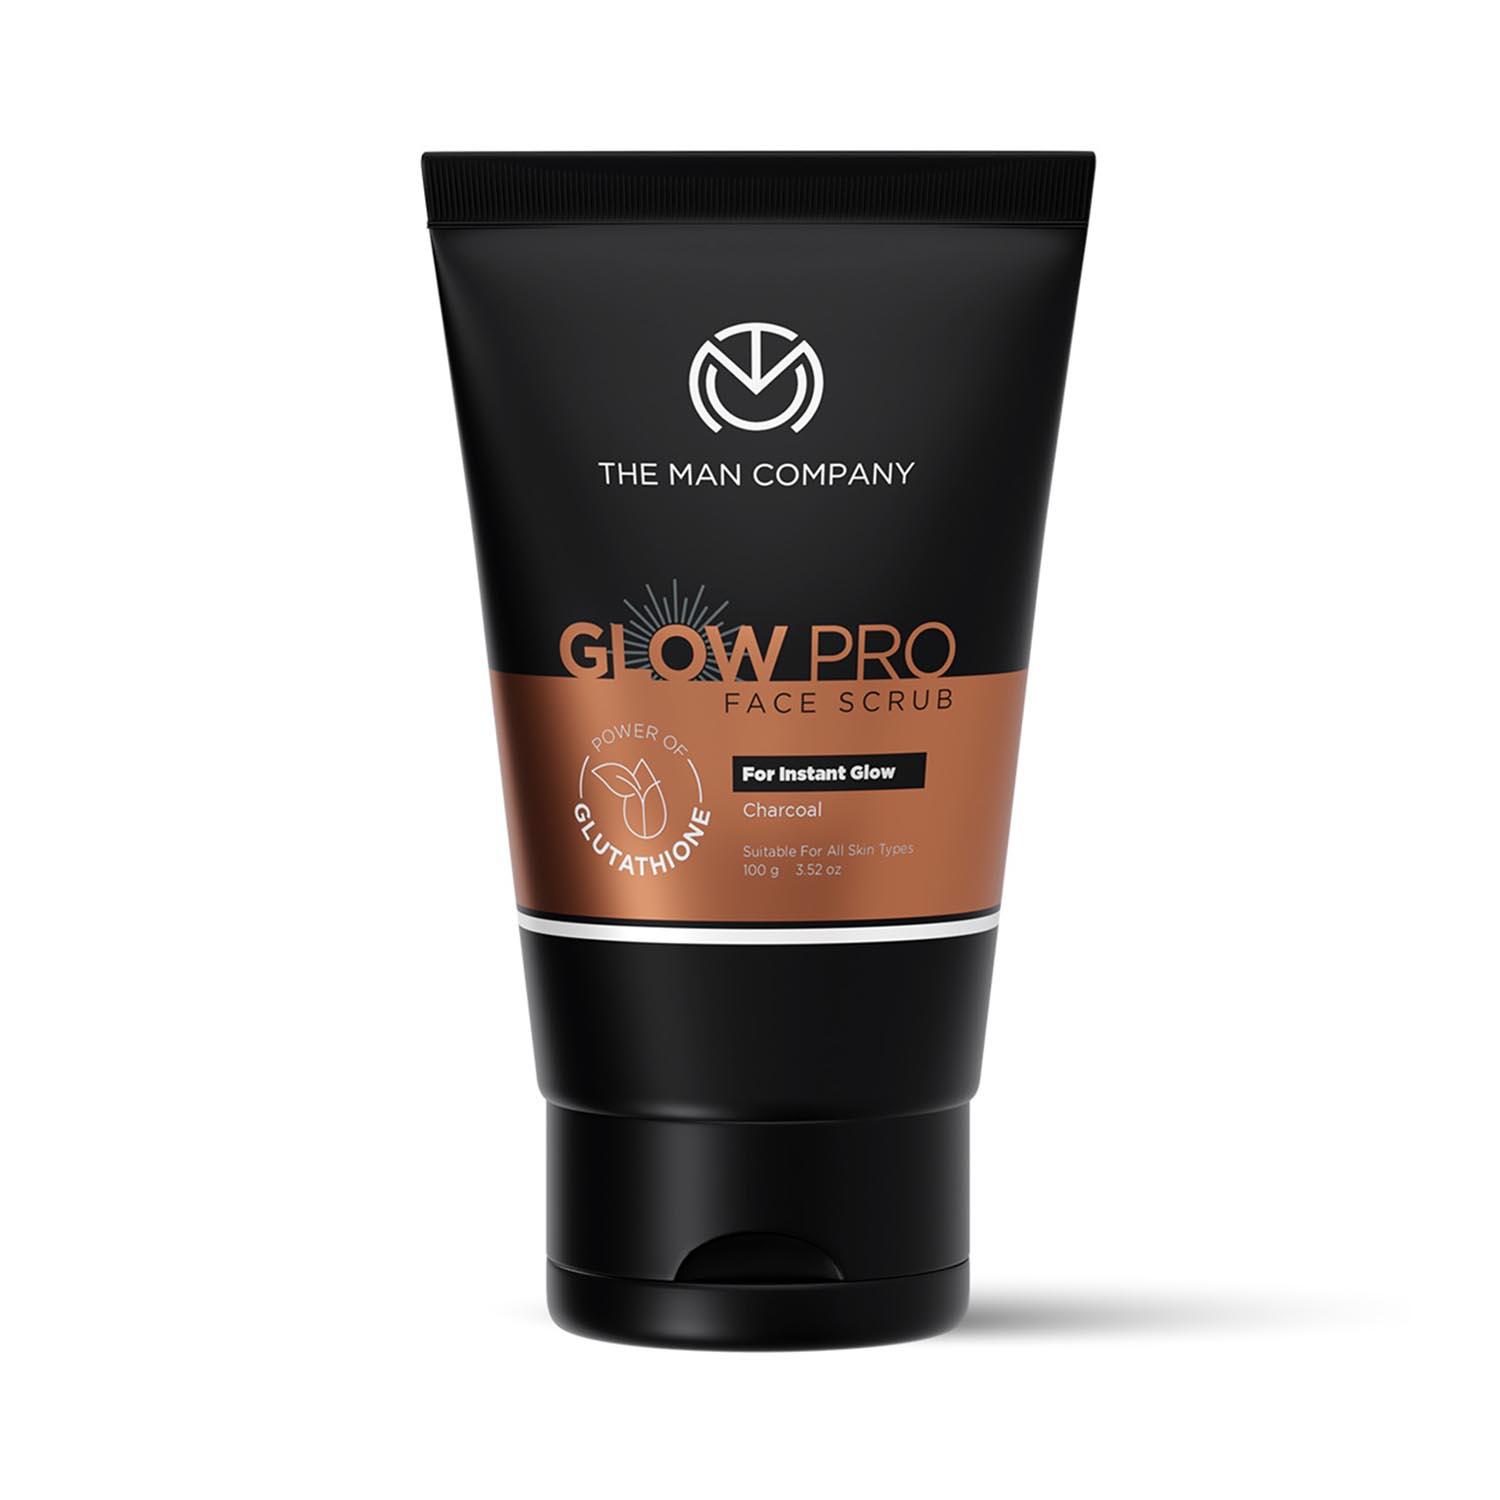 The Man Company | The Man Company Glow pro Face Scrub for Exfoliating & Even Skin Tone - (100 g)